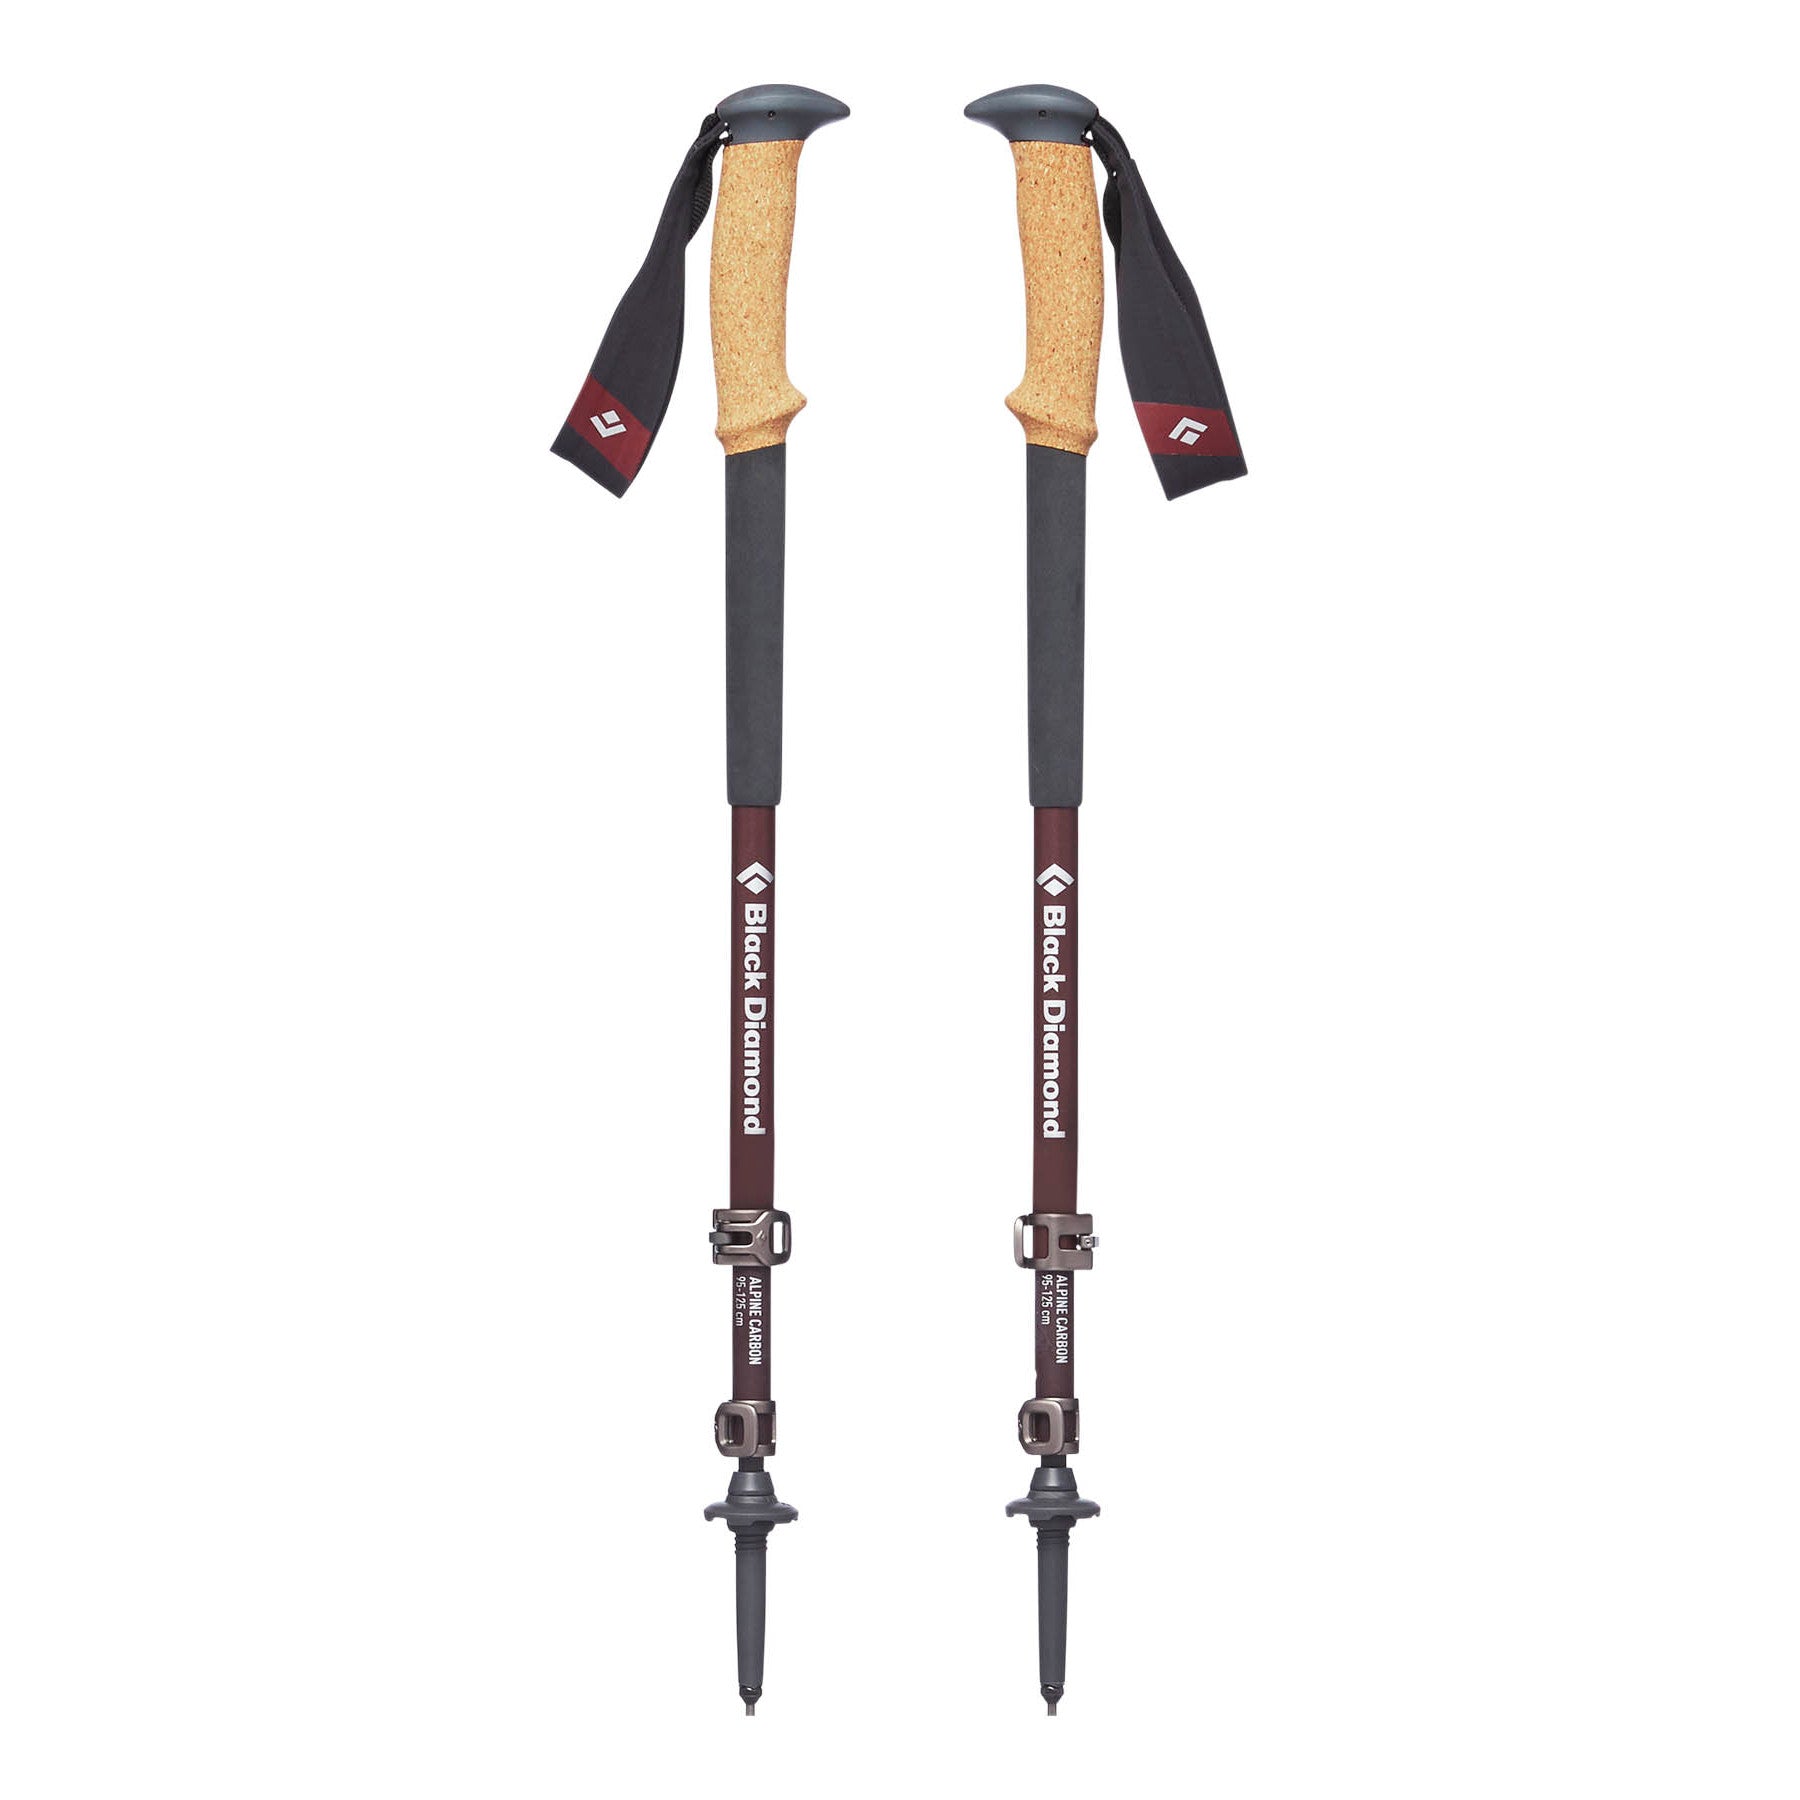 Pair of Black Diamond Alpine Carbon Cork Womens poles, shown fully extended and stood upright